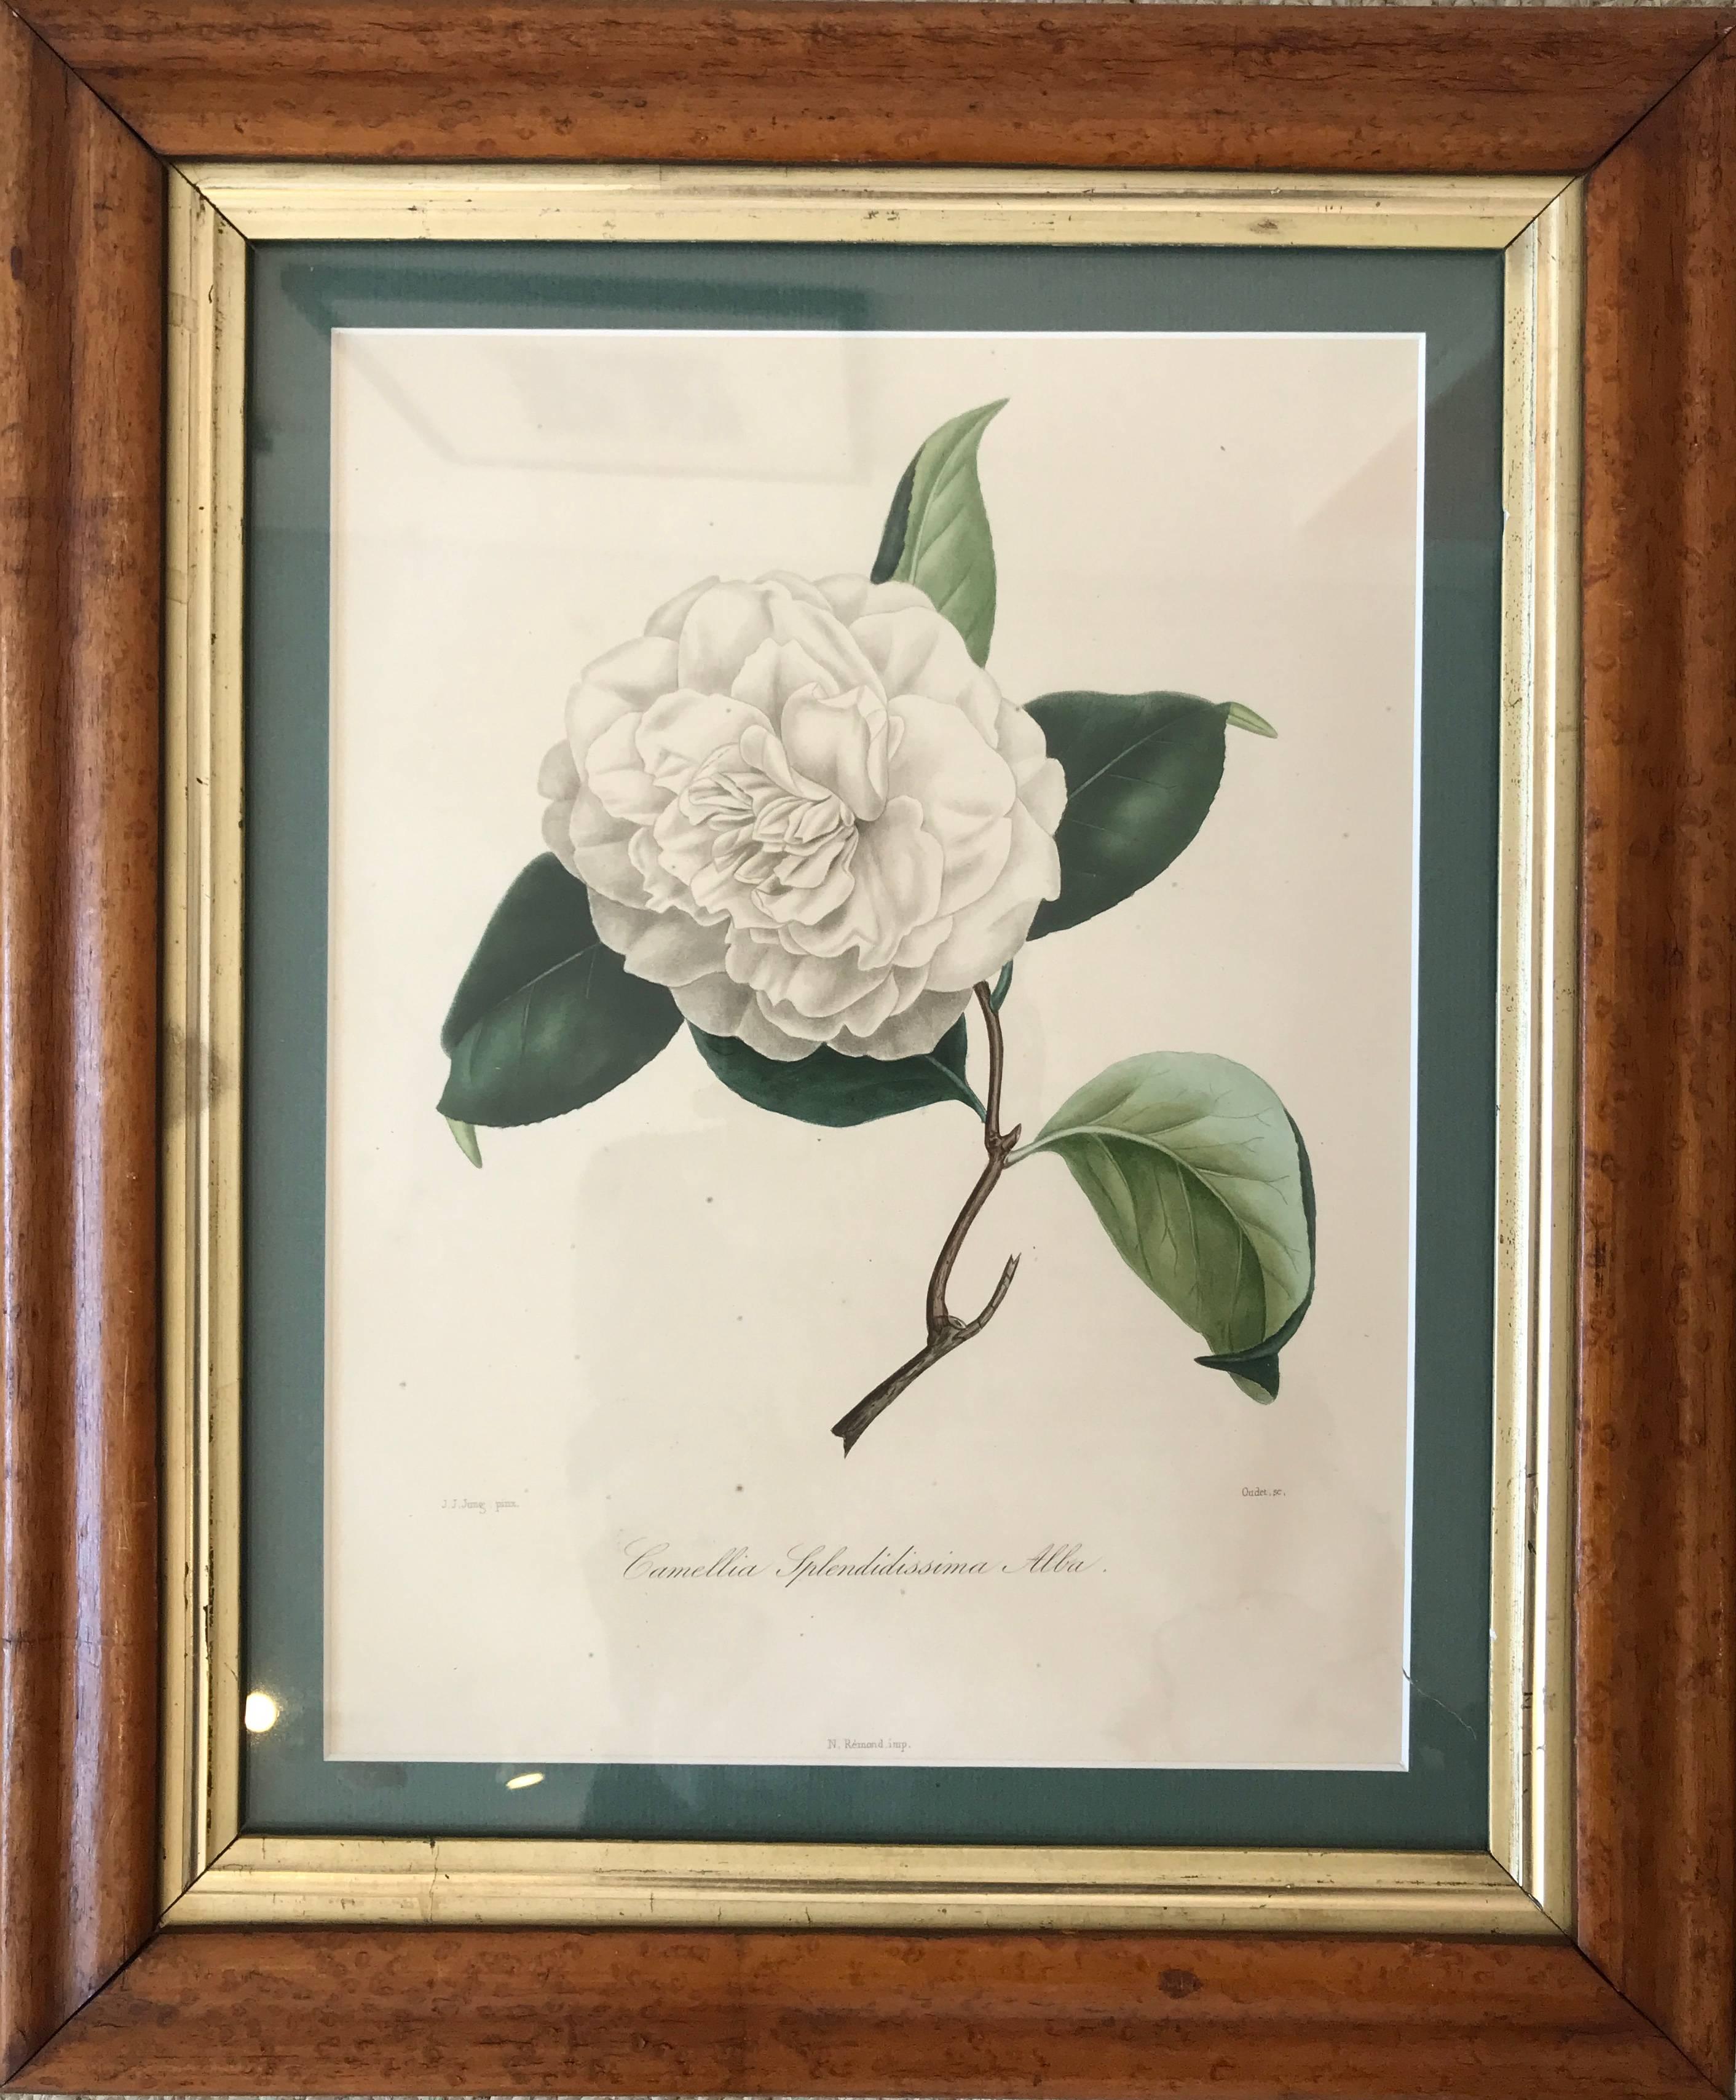 Warm, wonderful maple frames surround botanical prints that have been newly matted and framed. The colors are strong on these soft florals. Each print is accompanied by the original partial description, in French, as shown in the photos. Simply